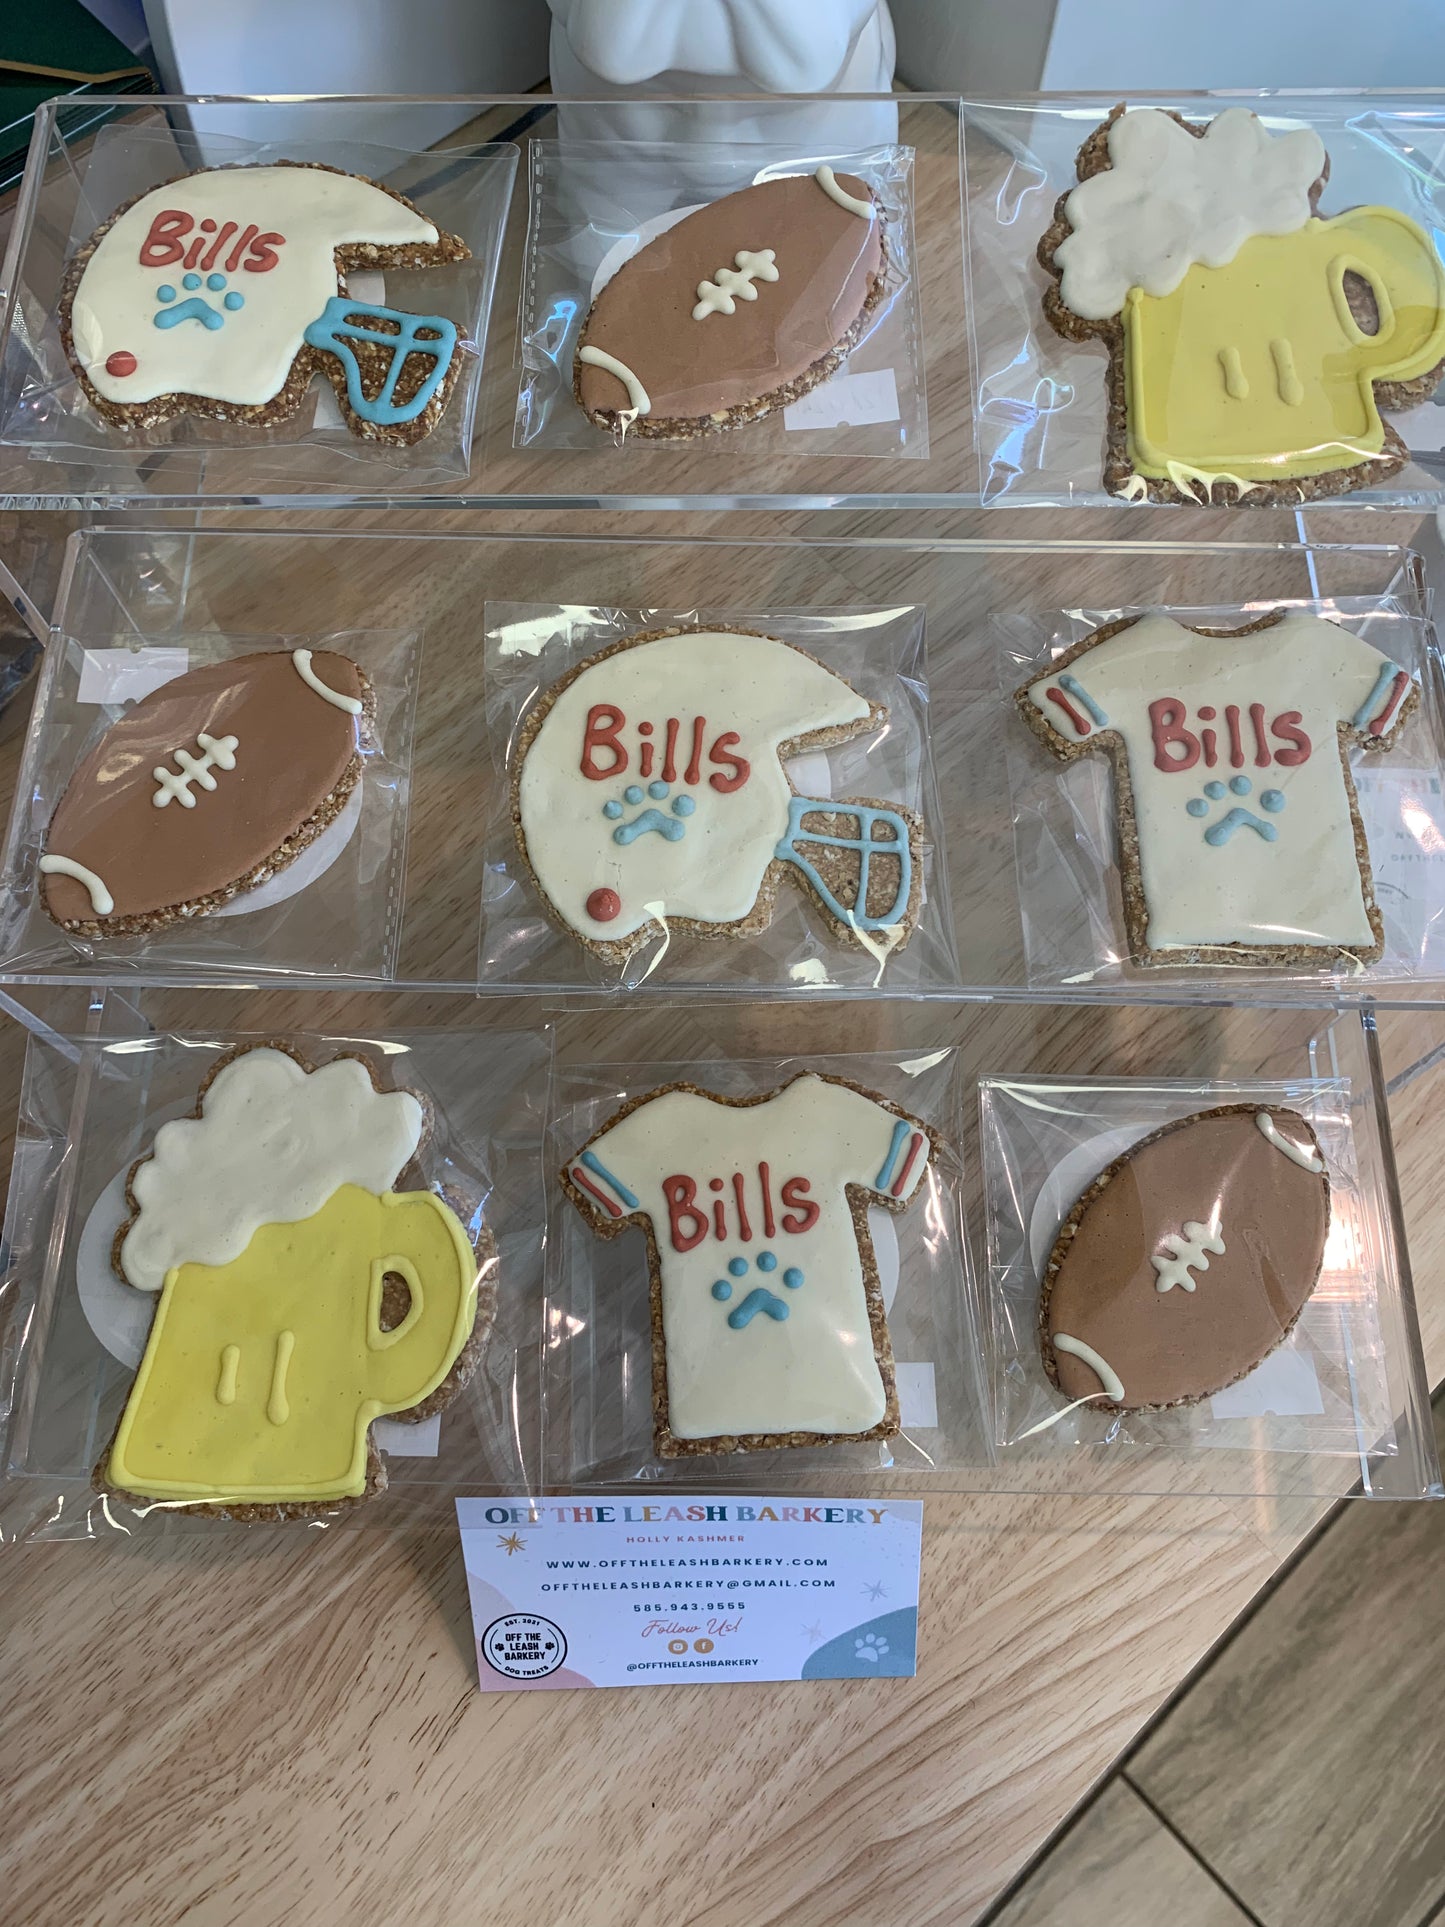 Off the leash Barkery tailgate Cookies